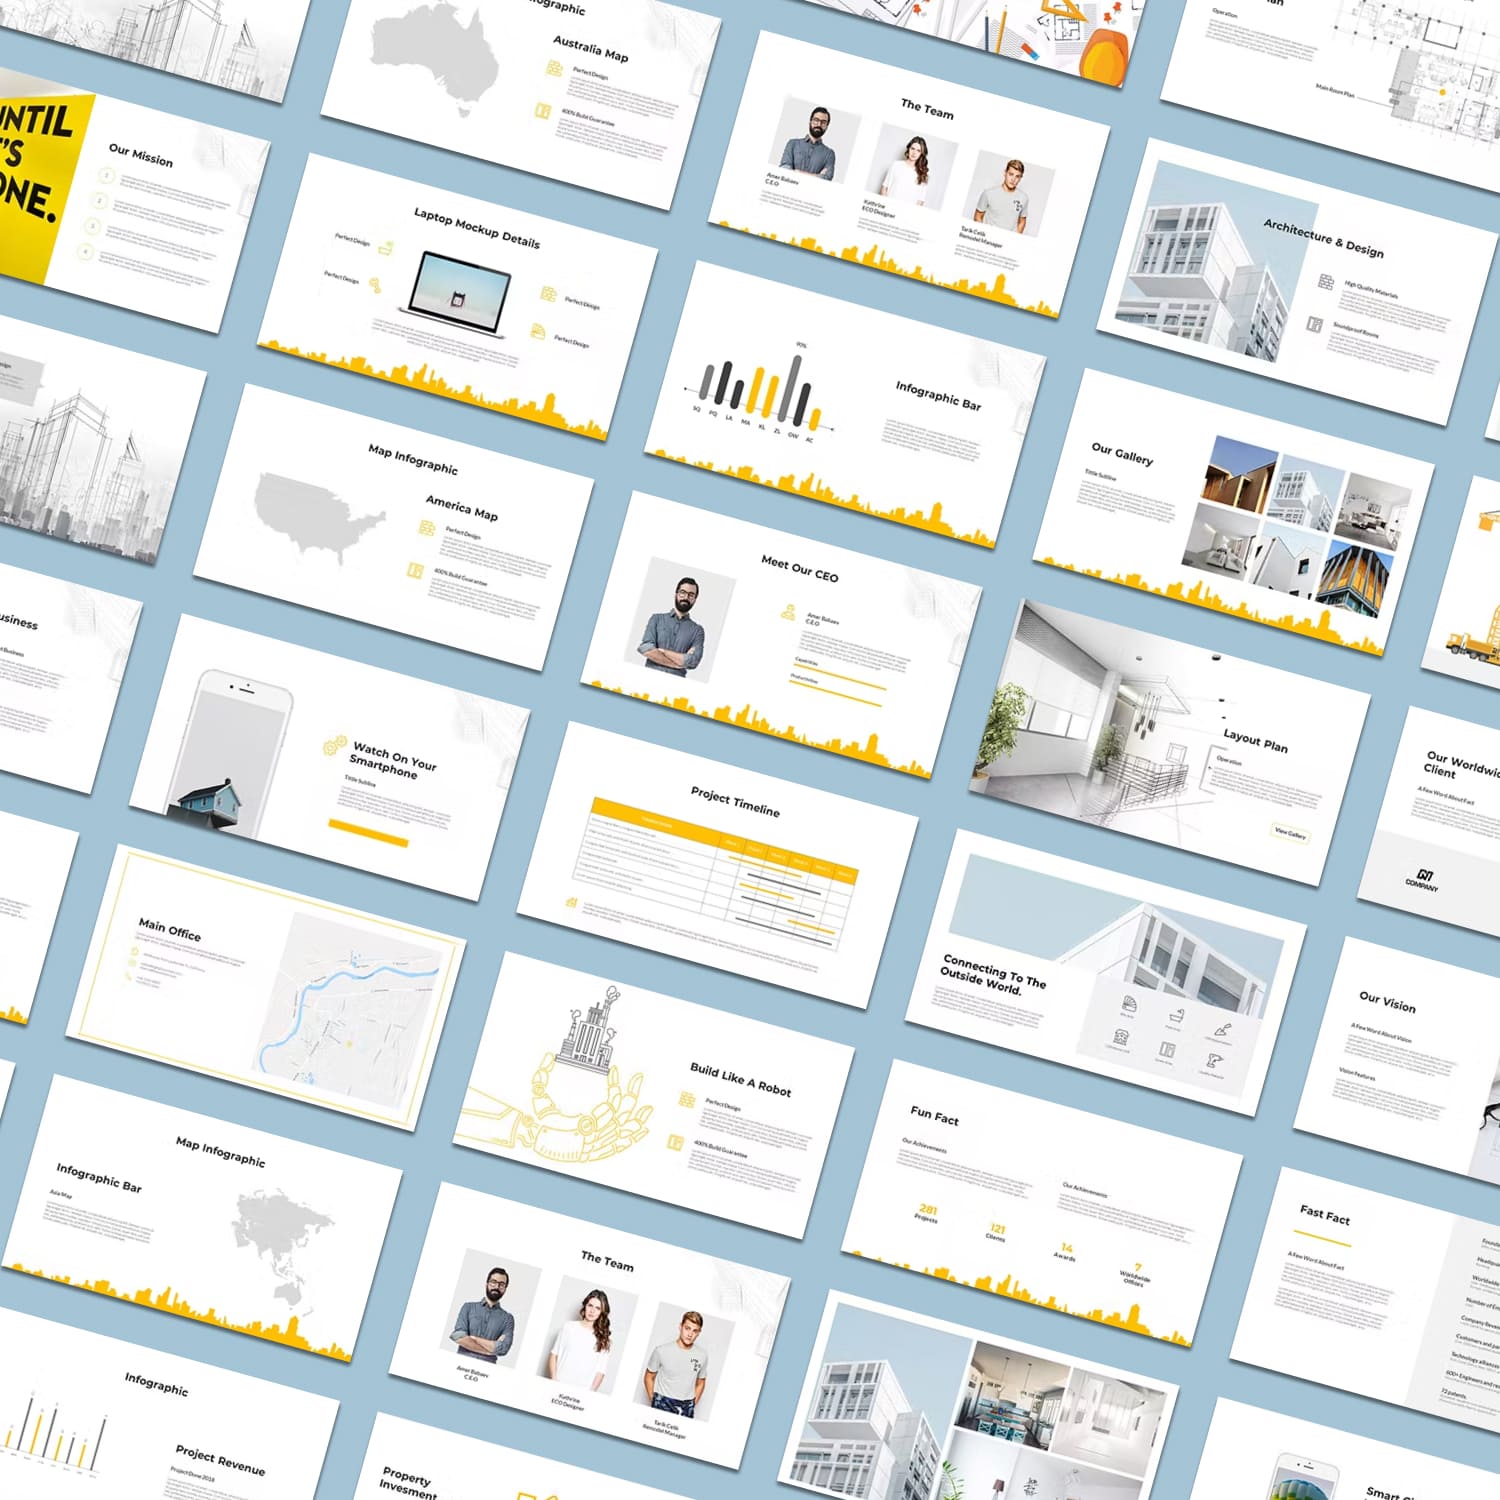 Calyx construction powerpoint template created by kylyman.